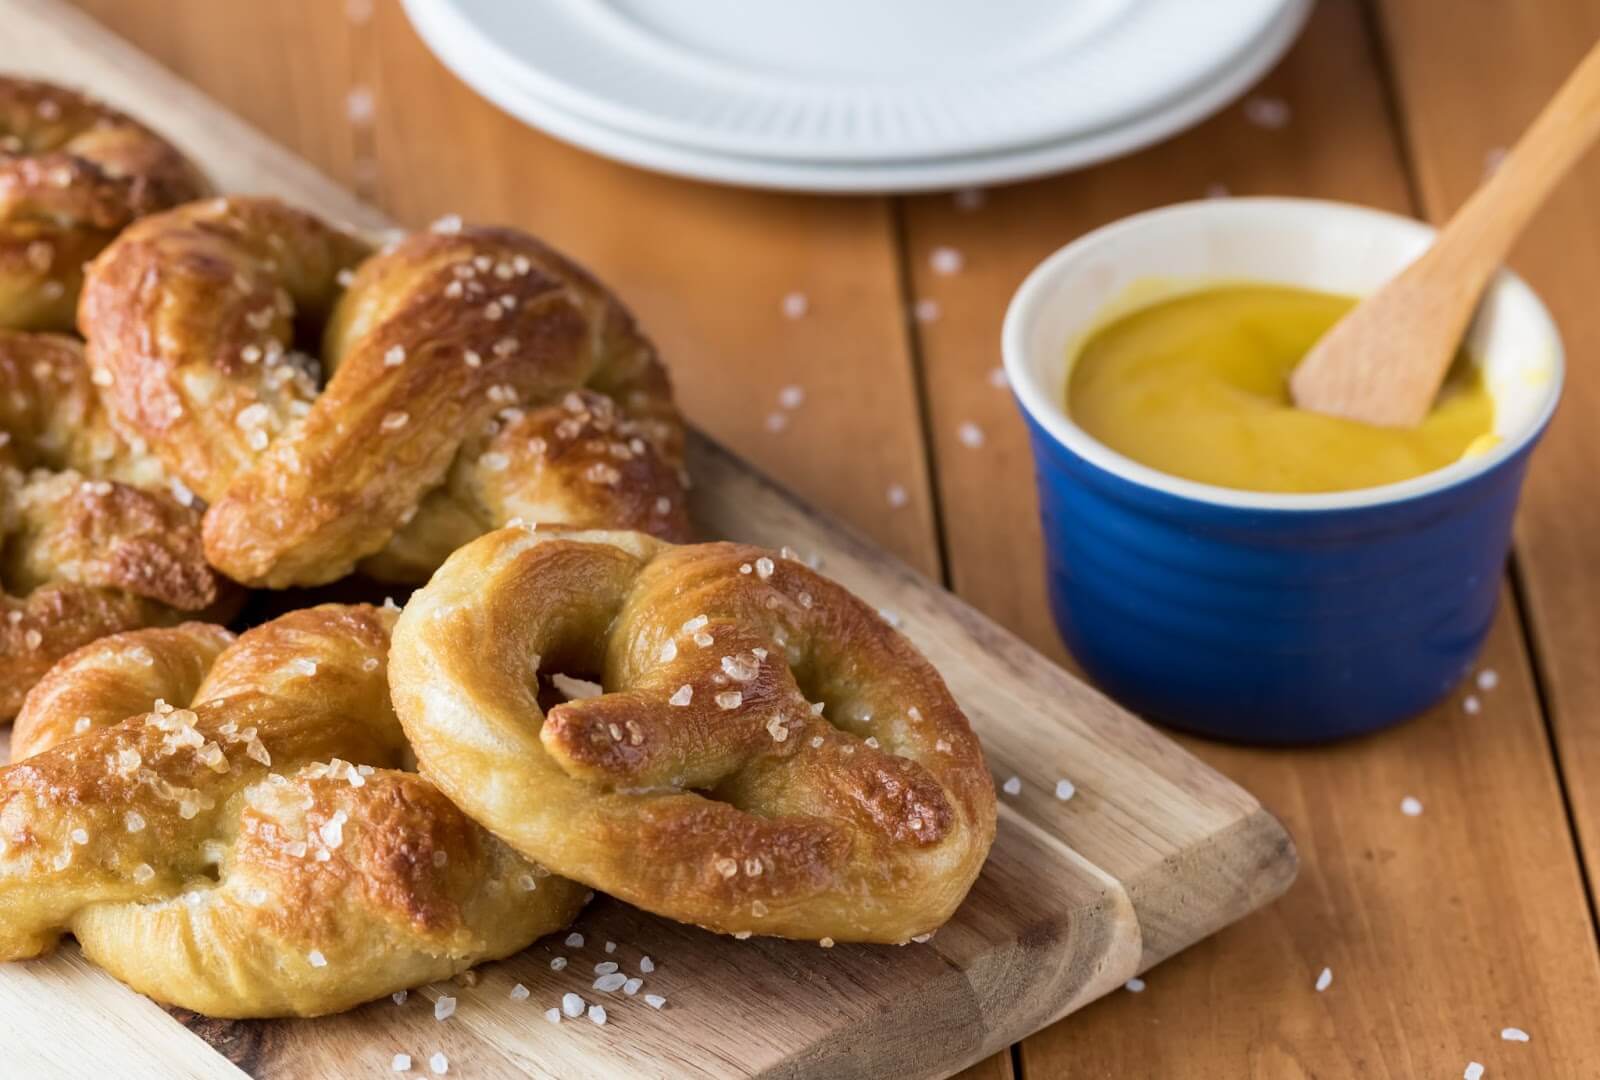 some freshly baked soft pretzels sitting on a wooden platter next to a small dish of mustard